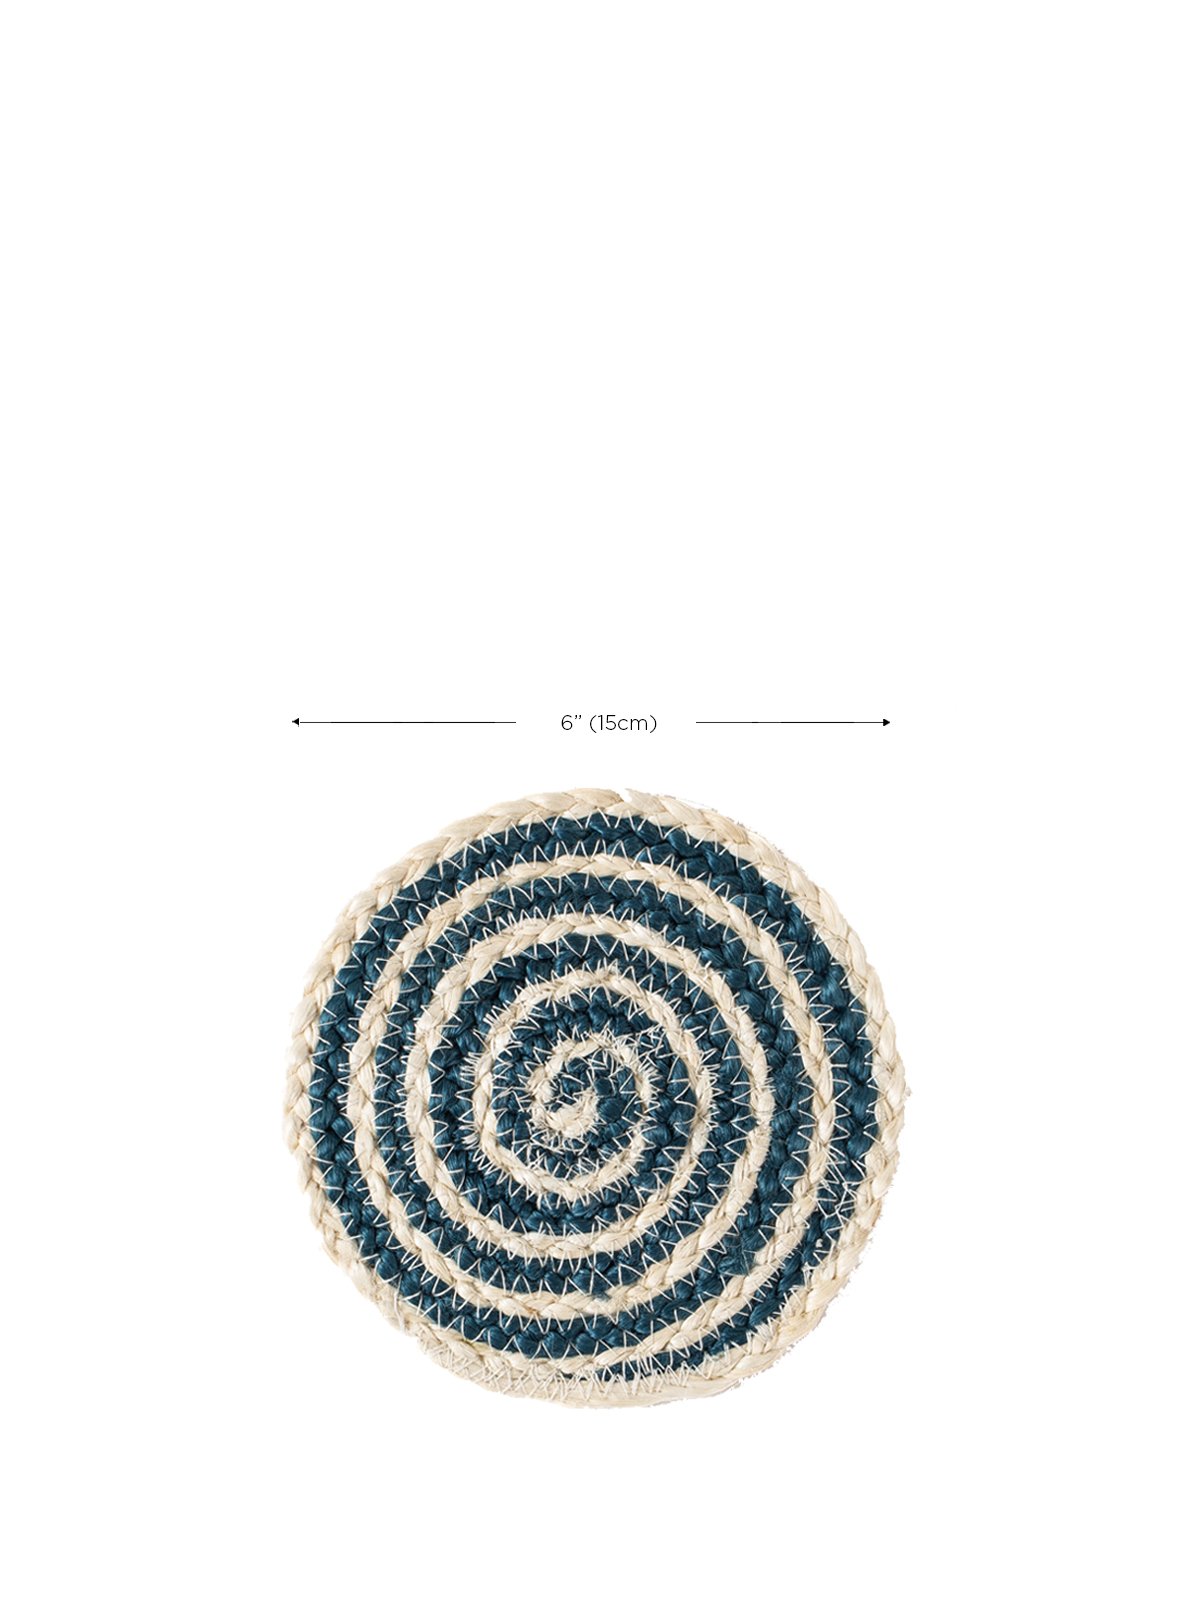 spiral jute coaster set in blue with dimensions 